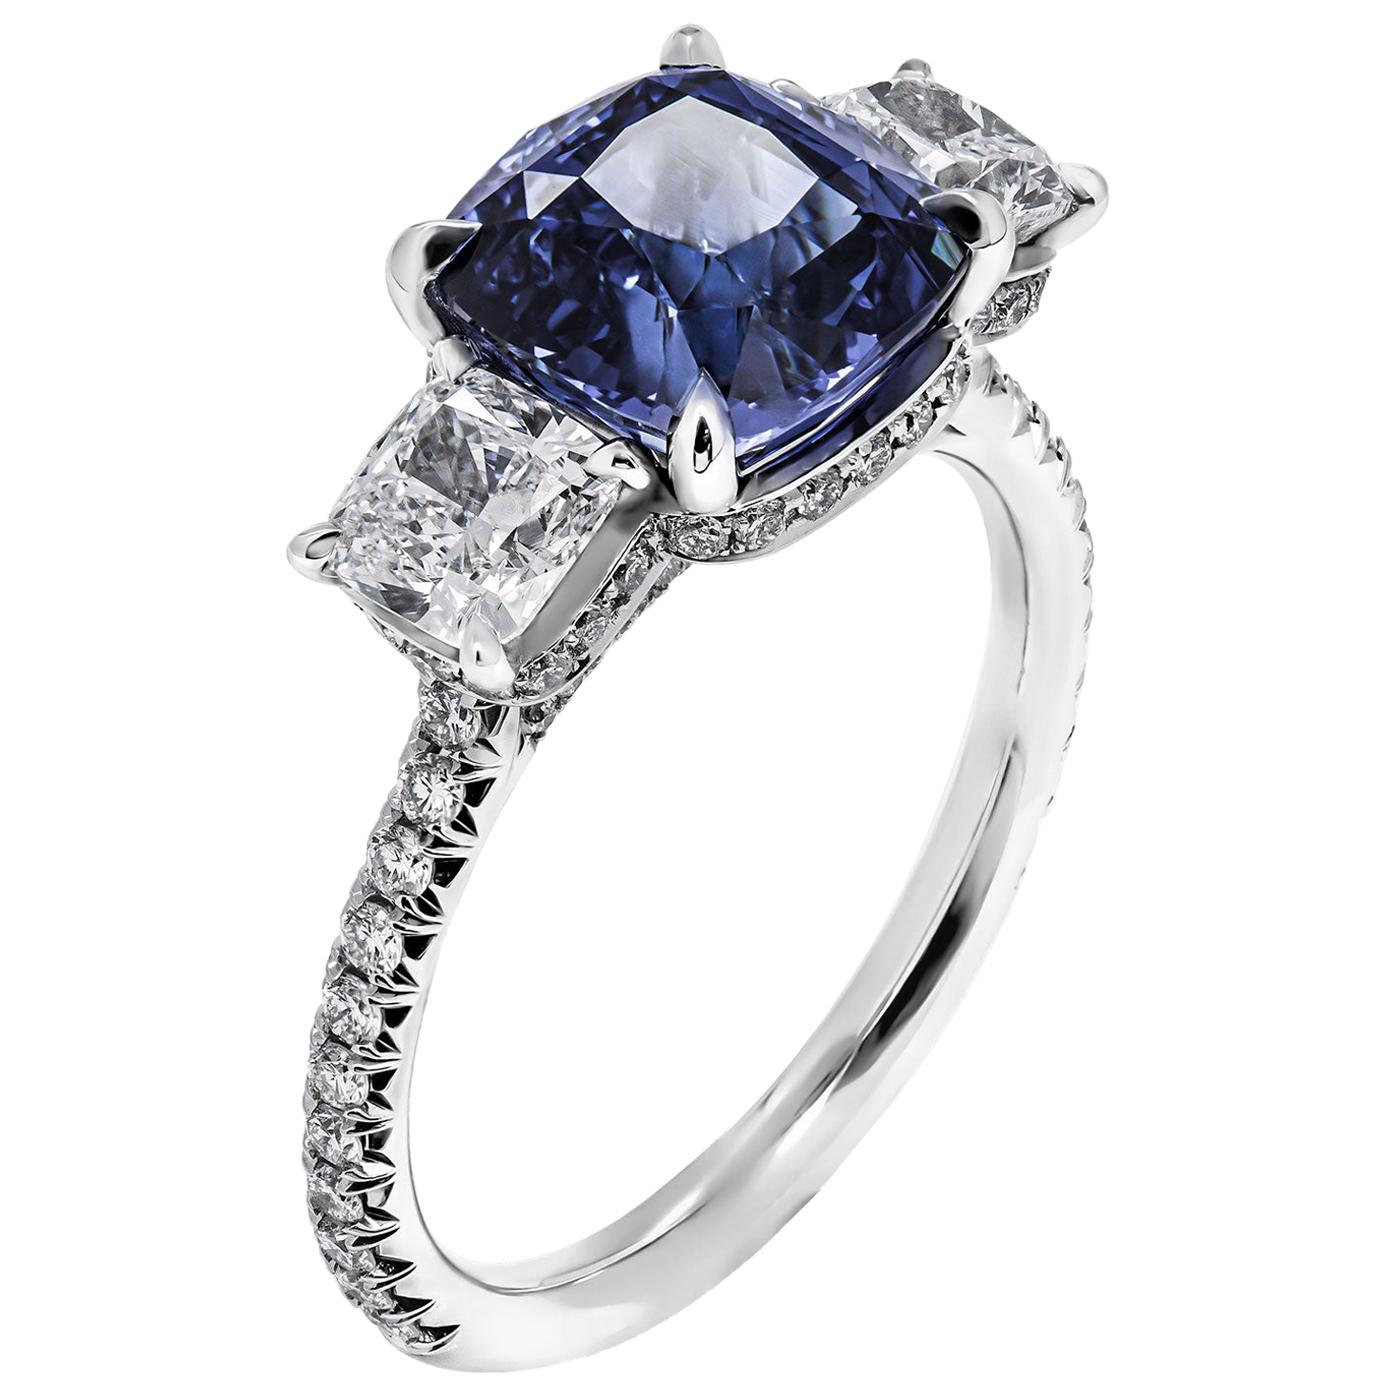 3-Stone Ring with 3.59 Carat Blue Sapphire For Sale